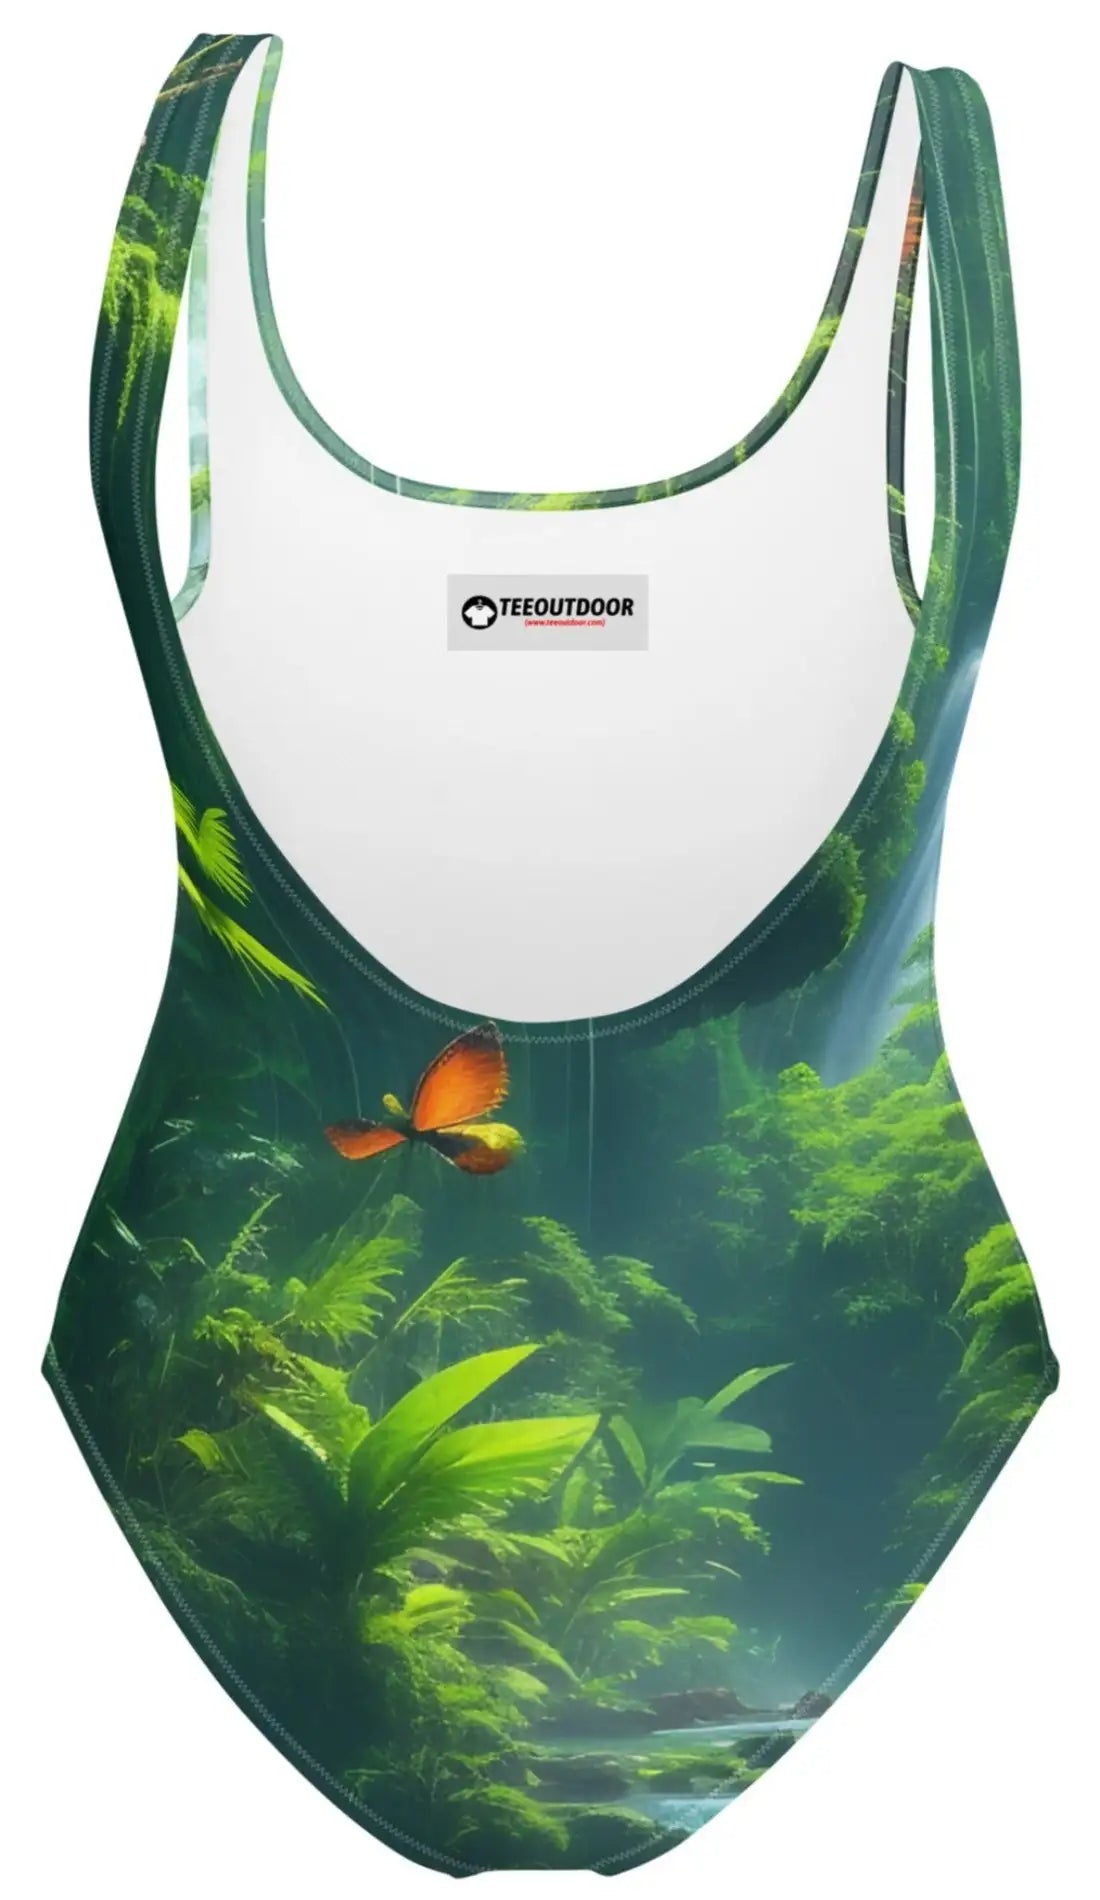 Tropical Haven: Illustrated Nature-Inspired One-Piece Swimsuit